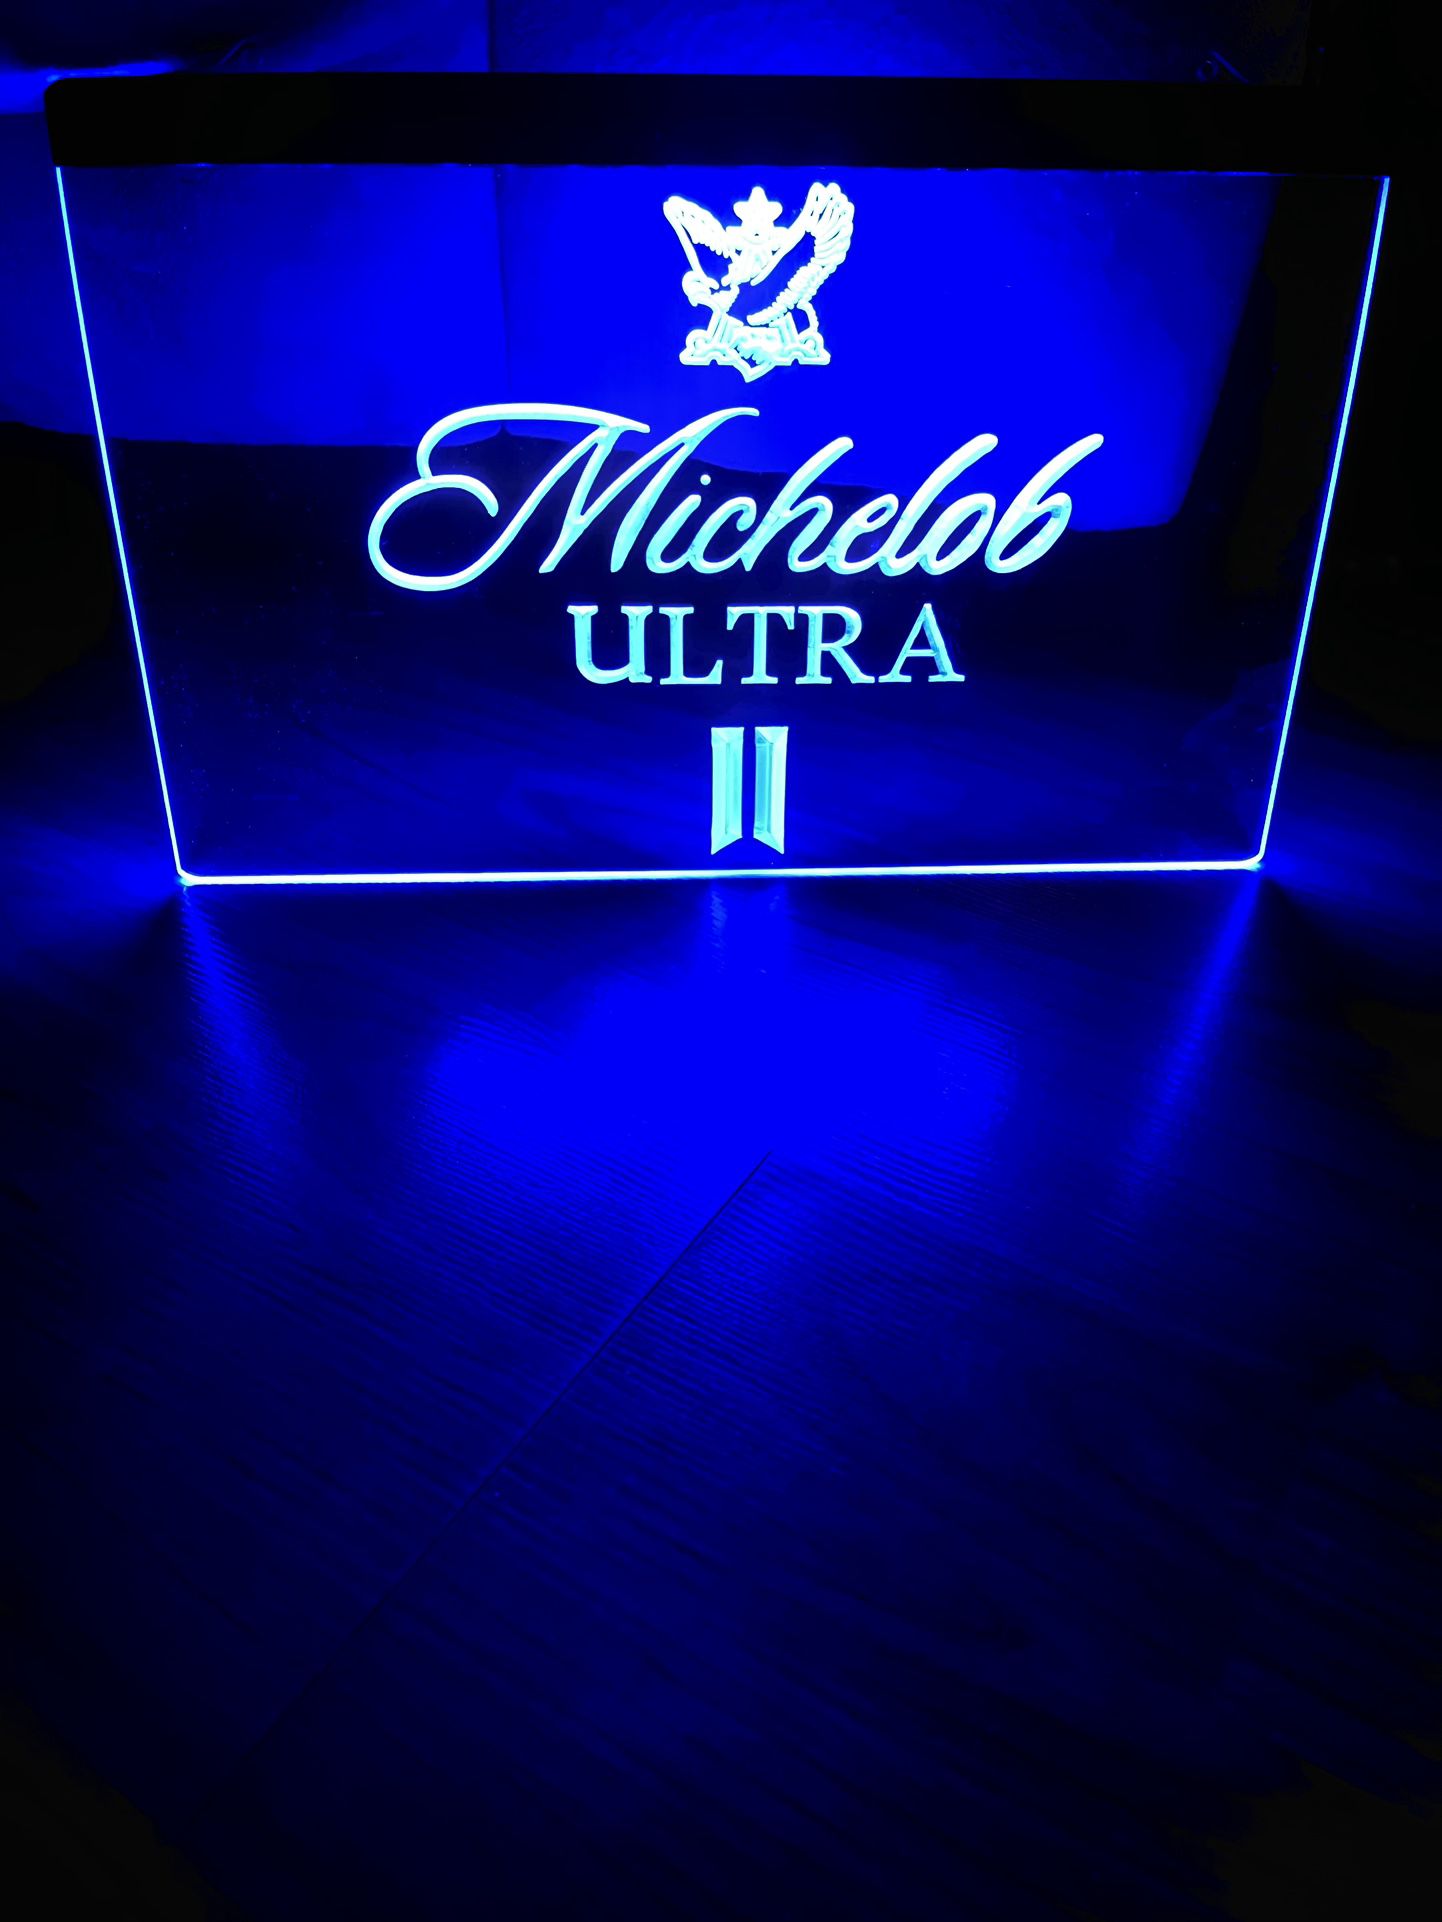 MICHELOB ULTRA LED NEON BLUE LIGHT SIGN 8x12